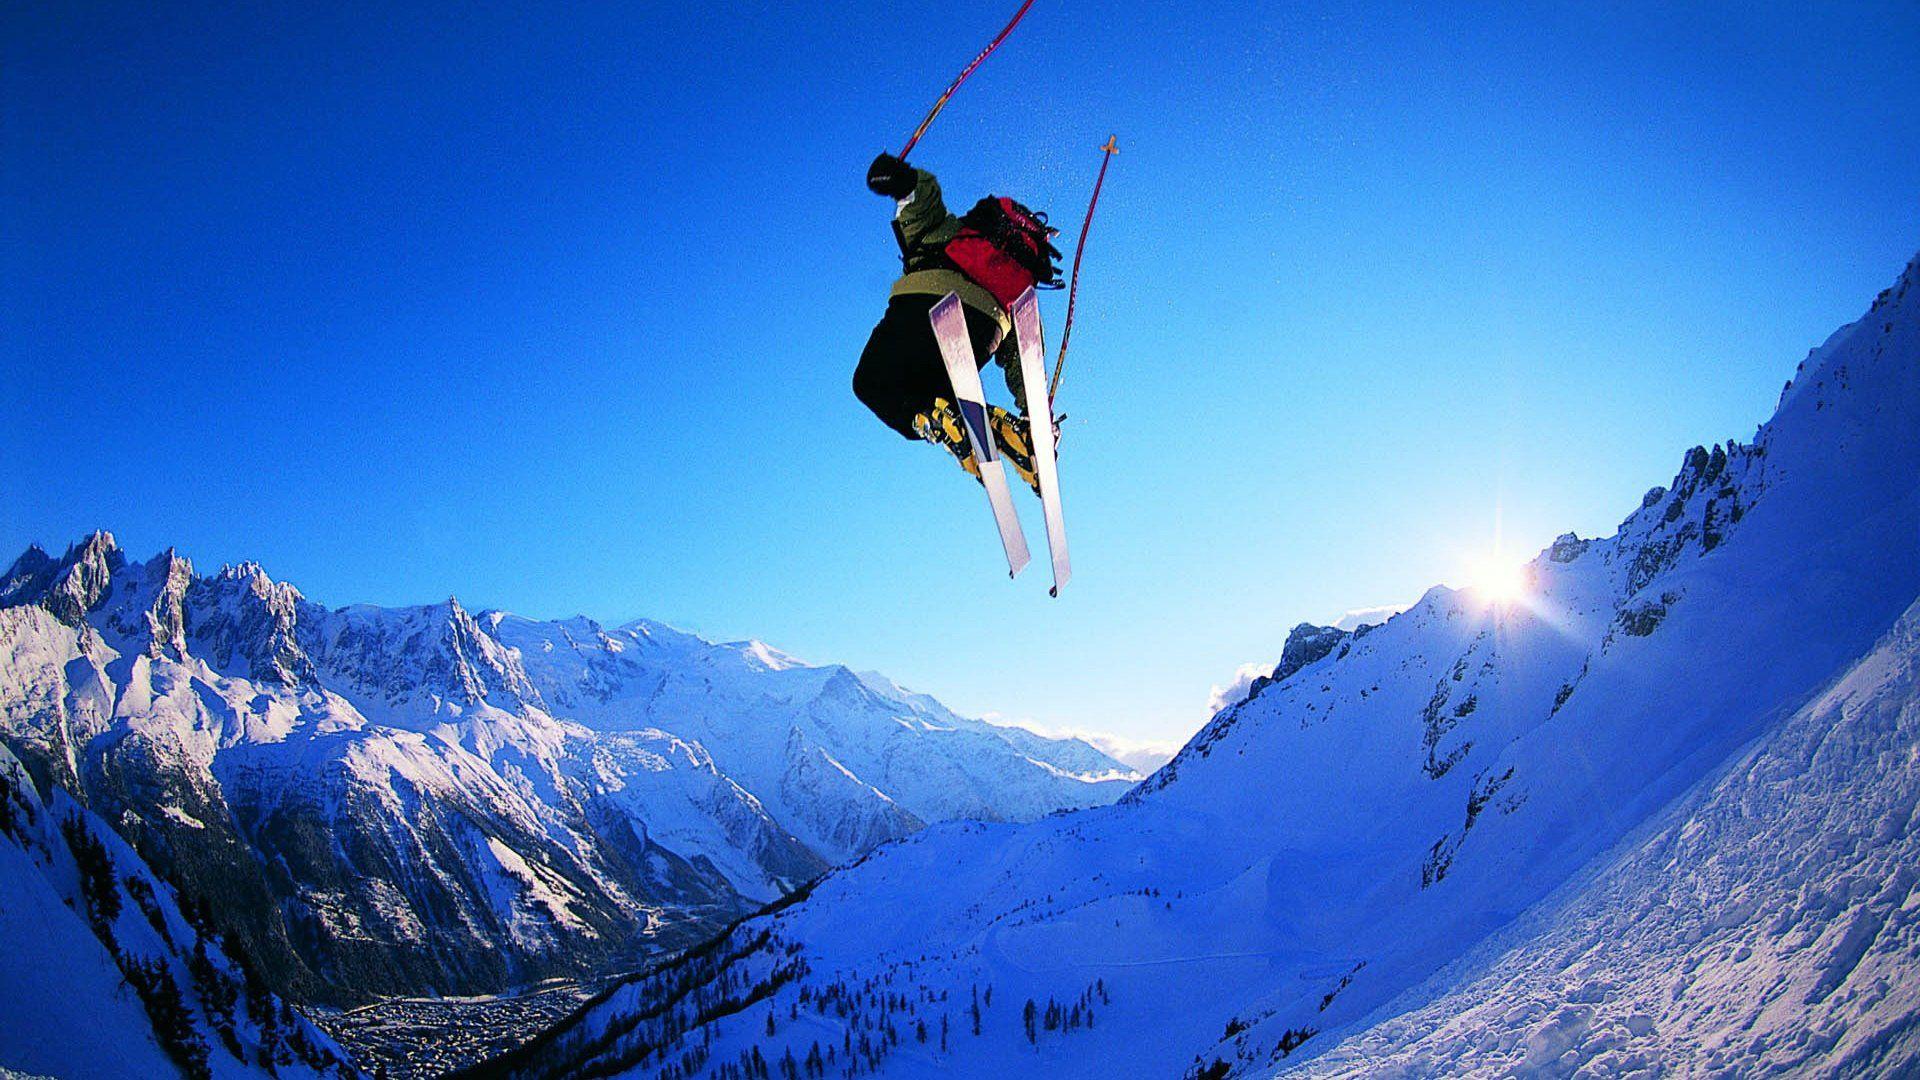 Snow Skiing Wallpapers - Top Free Snow ...